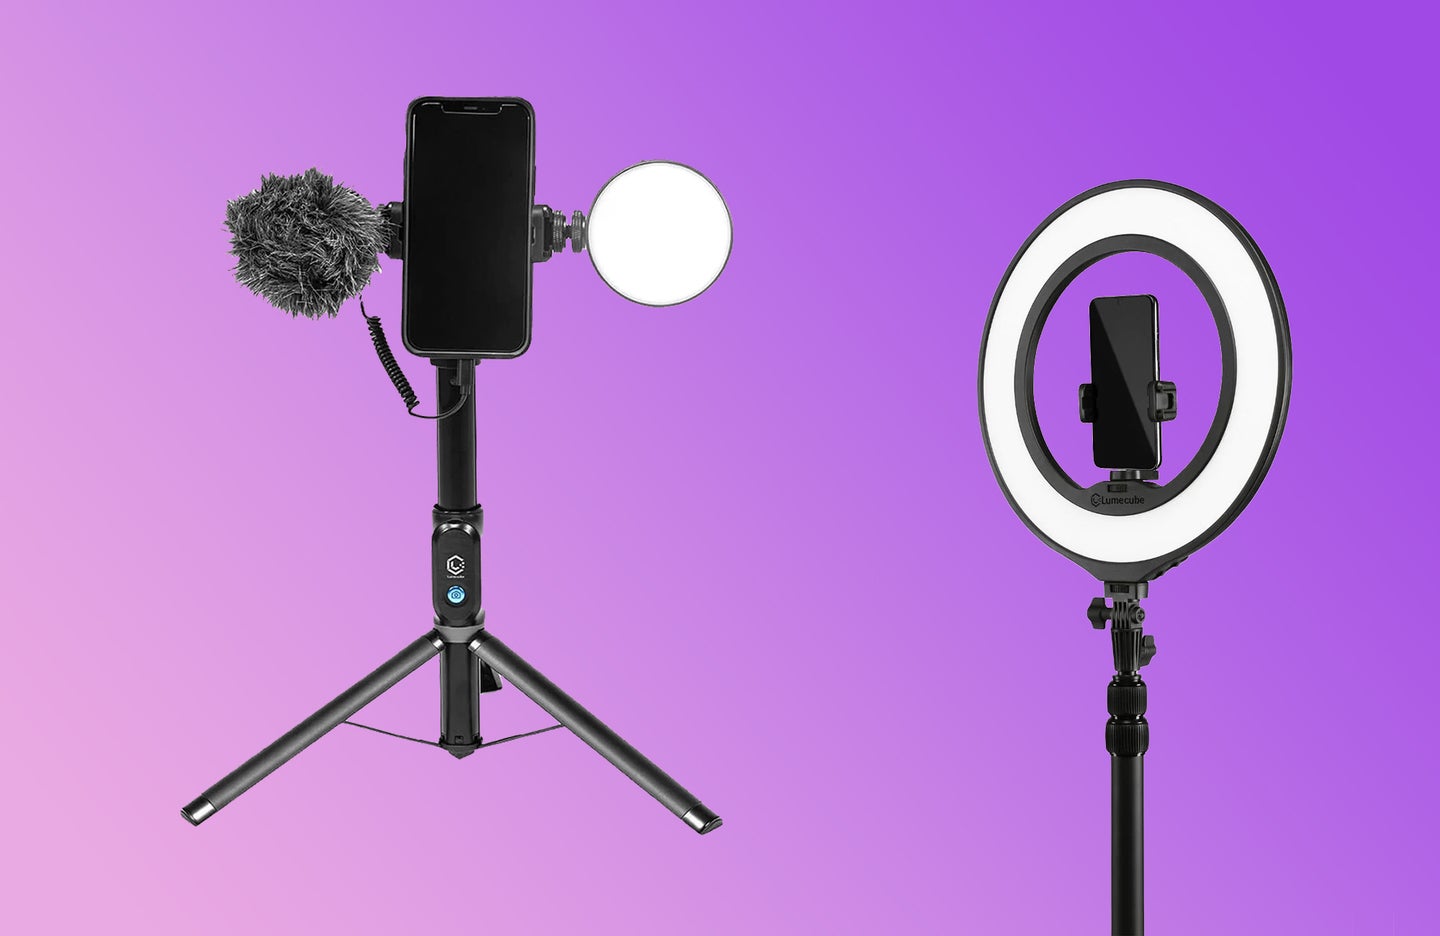 The Lume Cube Ring Light Mini and Mobile Creator Kit 2.0 against a backgroun that fades from pink to purple